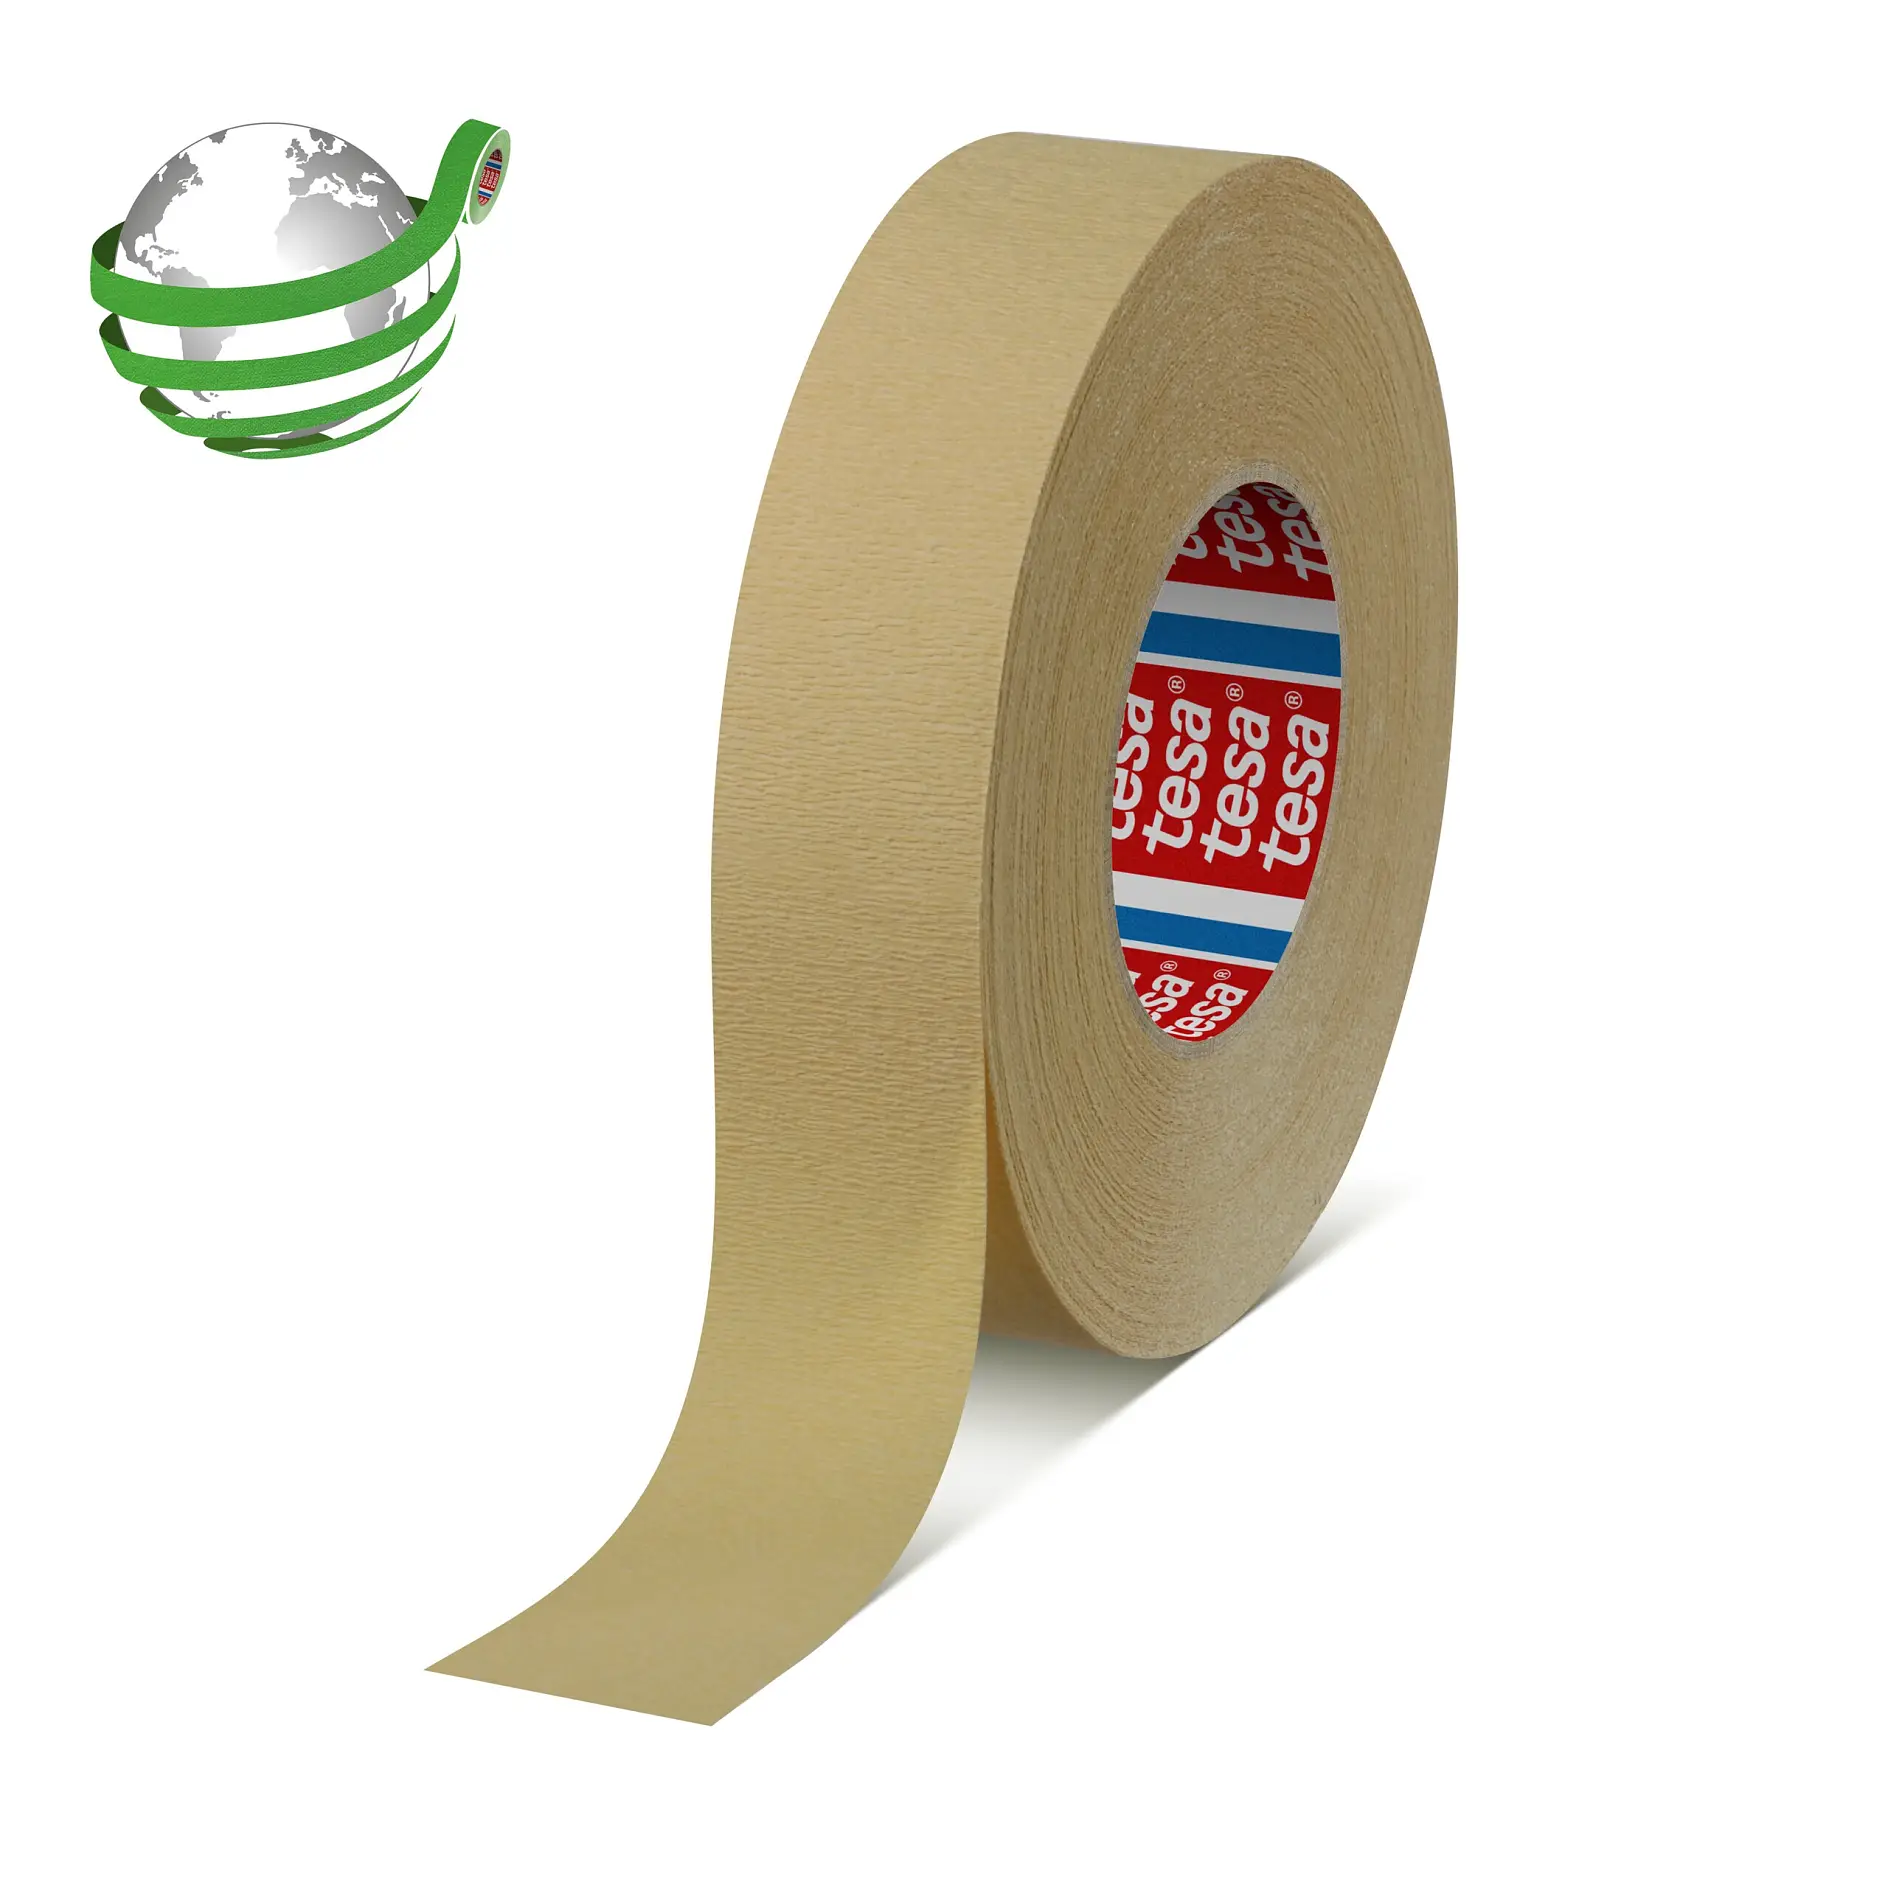 tesa-4322-stretchable-paper-masking-tape-packaging-brown-043220001200-pr-with-marker